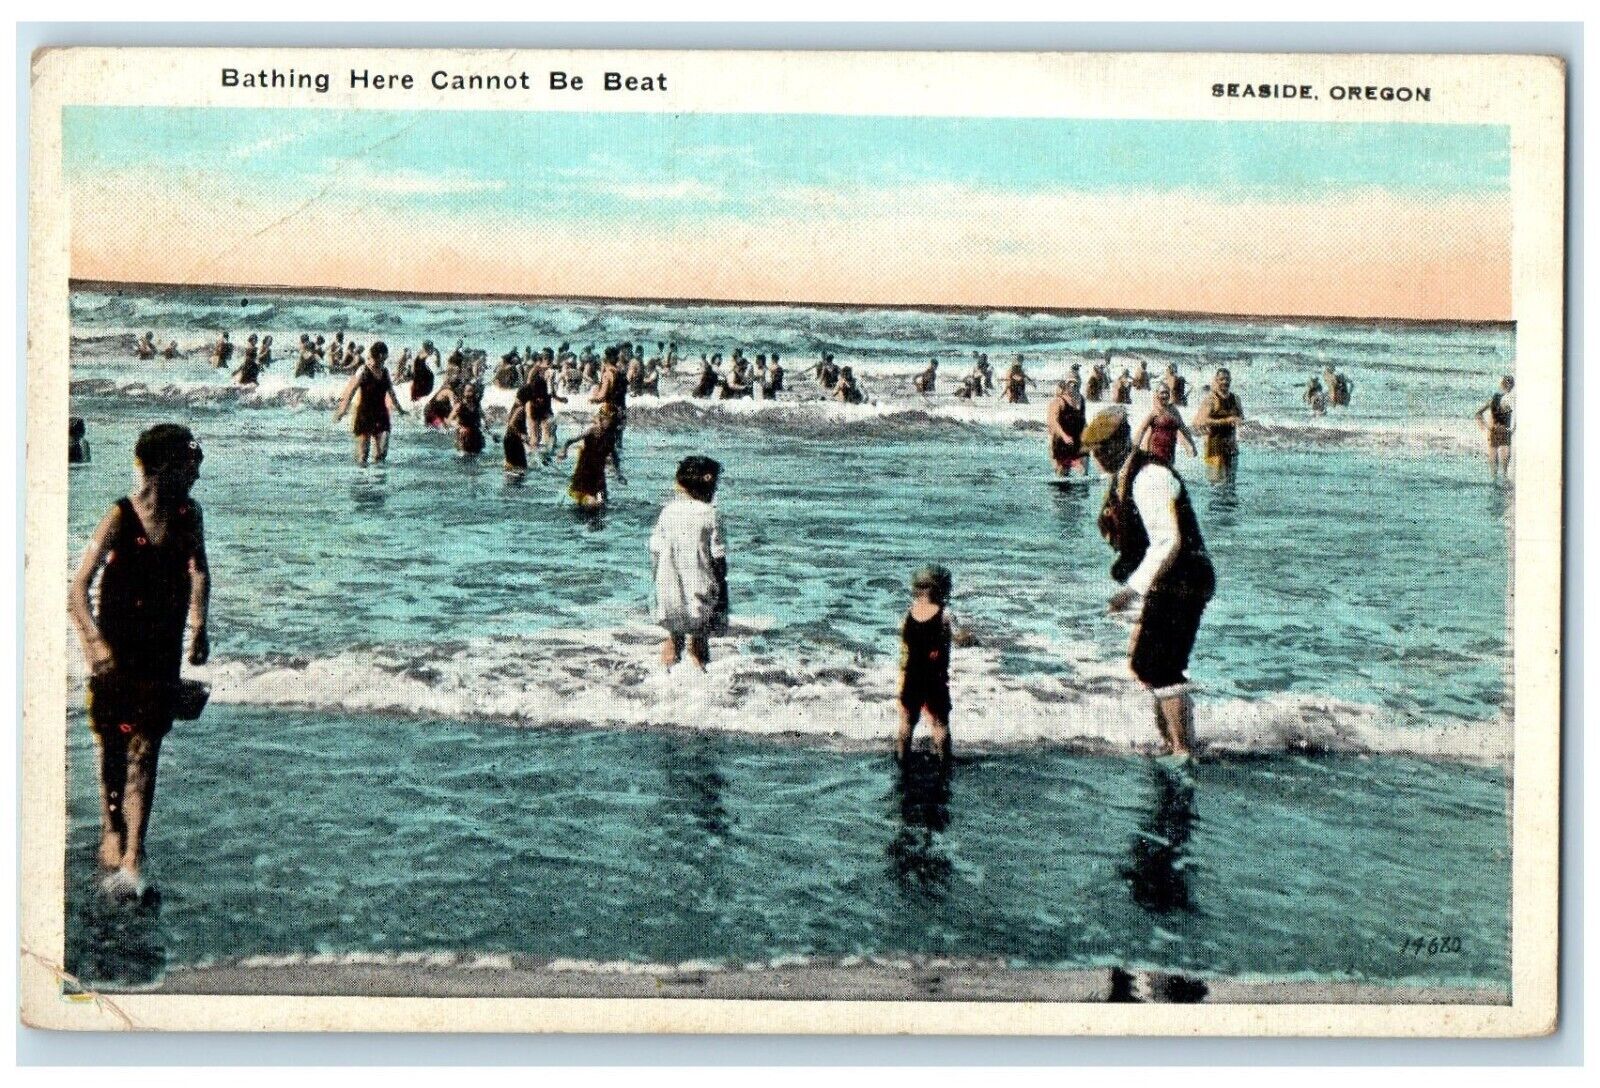 c1920 Bathing Here Cannot Be Beat Beach Seaside Oregon OR PNC Vintage Postcard